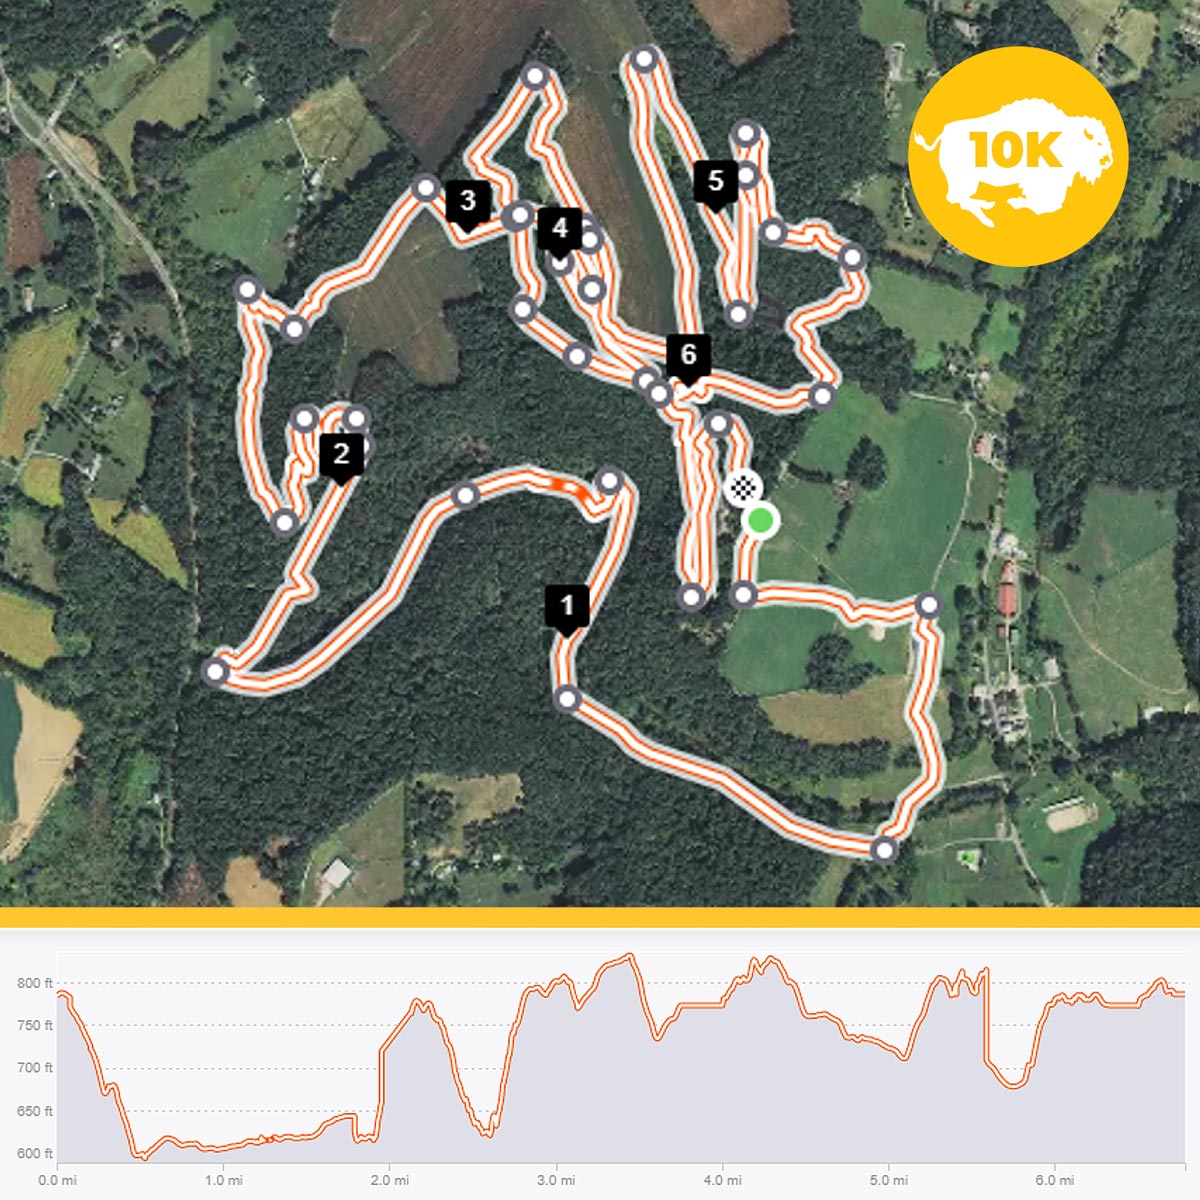 10K Trail Course Map including elevation changes